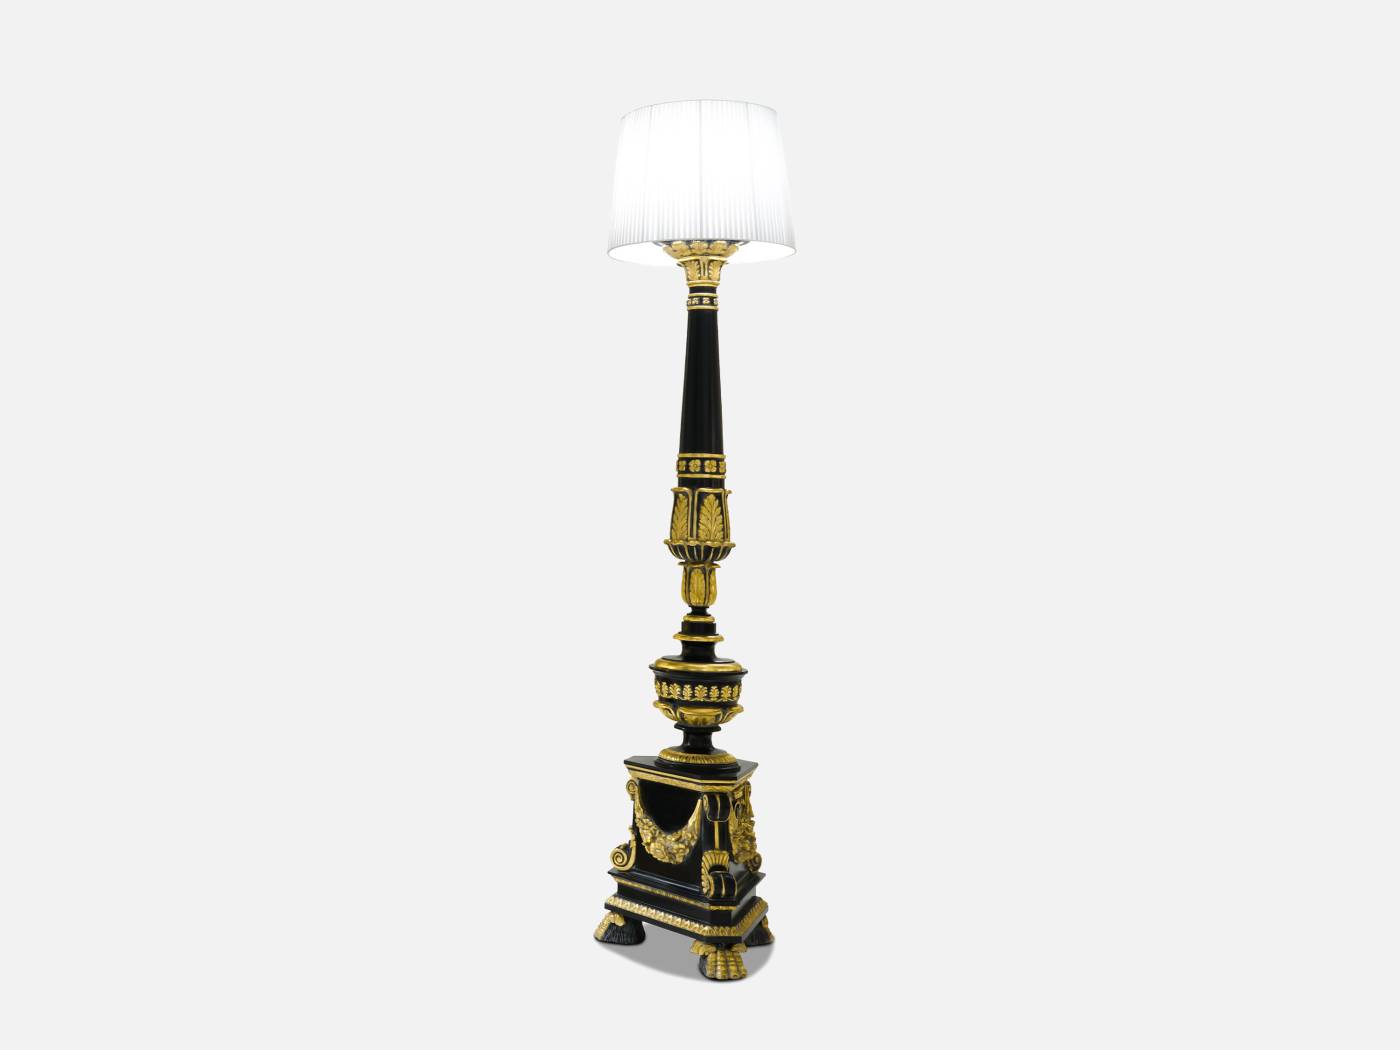 ART. 2132 – Discover the elegance of luxury classic Lighting made in Italy by C.G. Capelletti. Luxury classic furniture that combines style and craftsmanship.